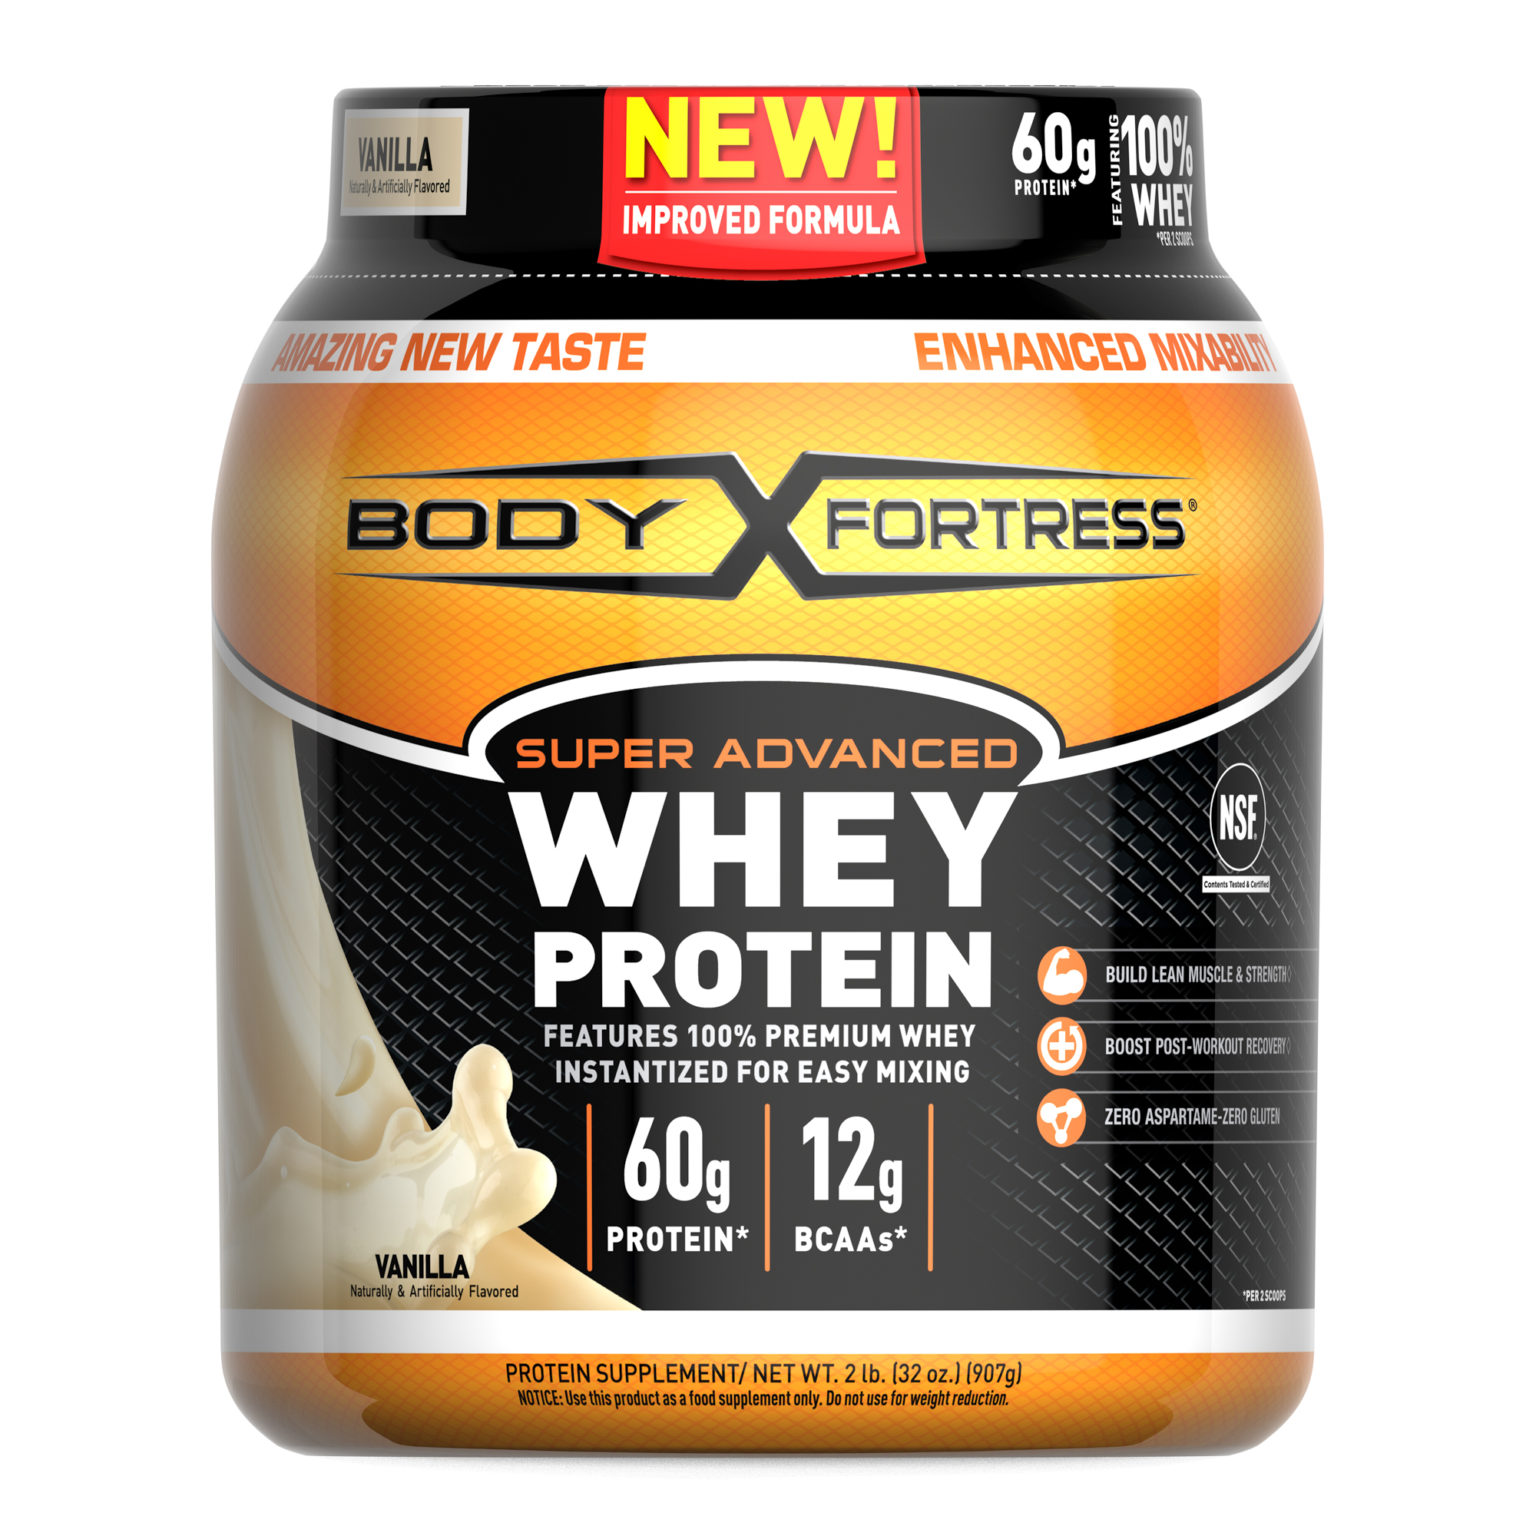 Body Fortress Whey Protein Review 2020